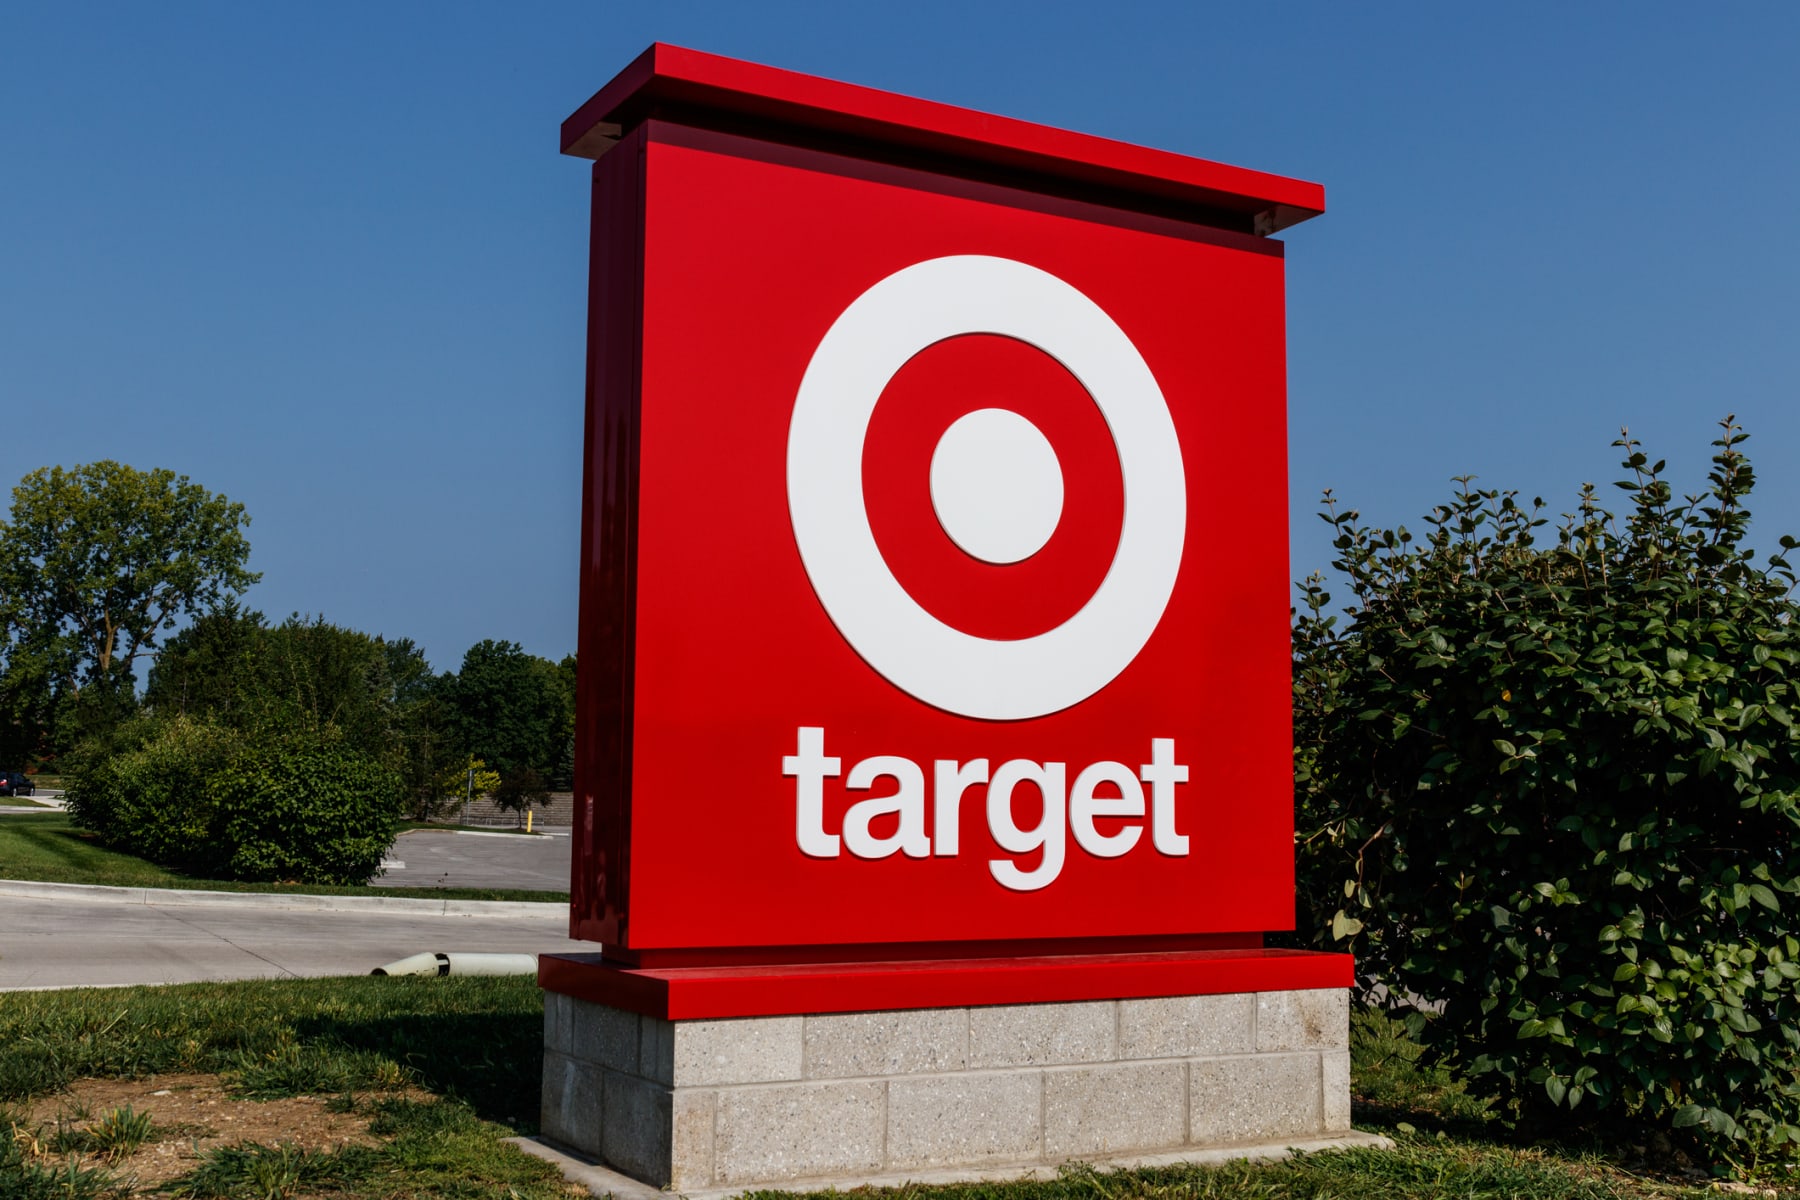 This free standing store sign displays the Target logo.